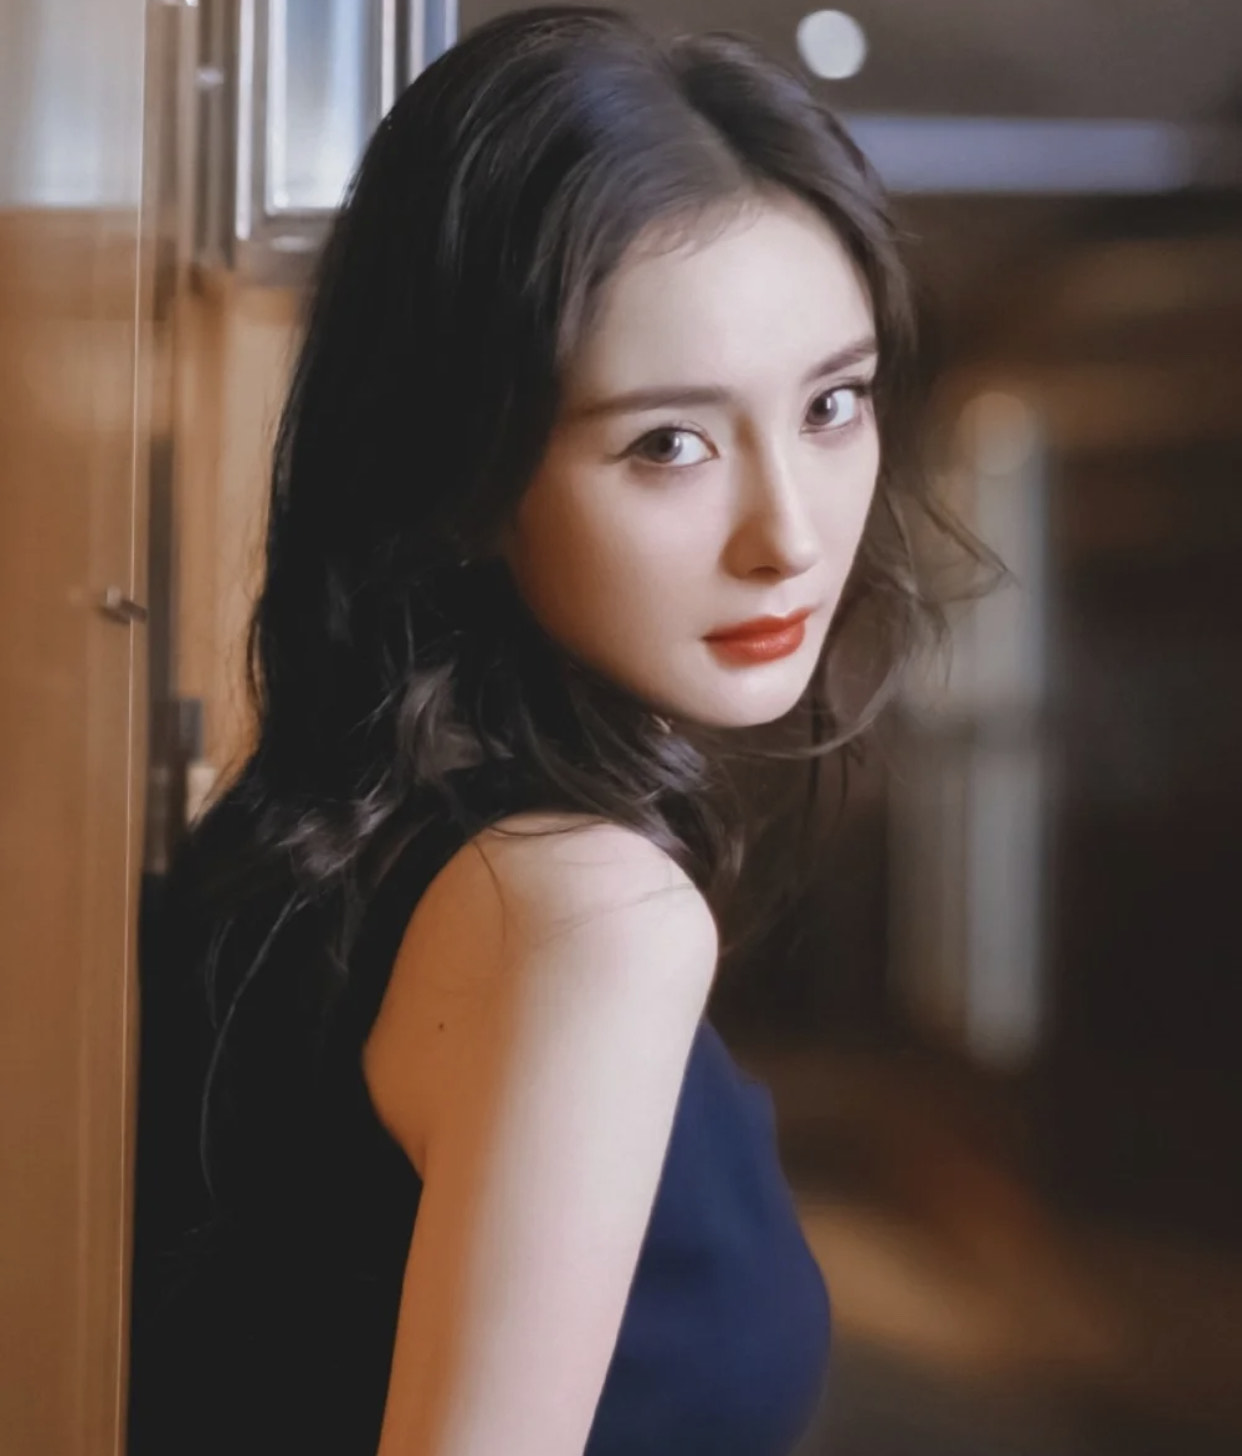 With age female star is in transition, yang Mi still is in " sunken girl " ! What feature does girl face have? 